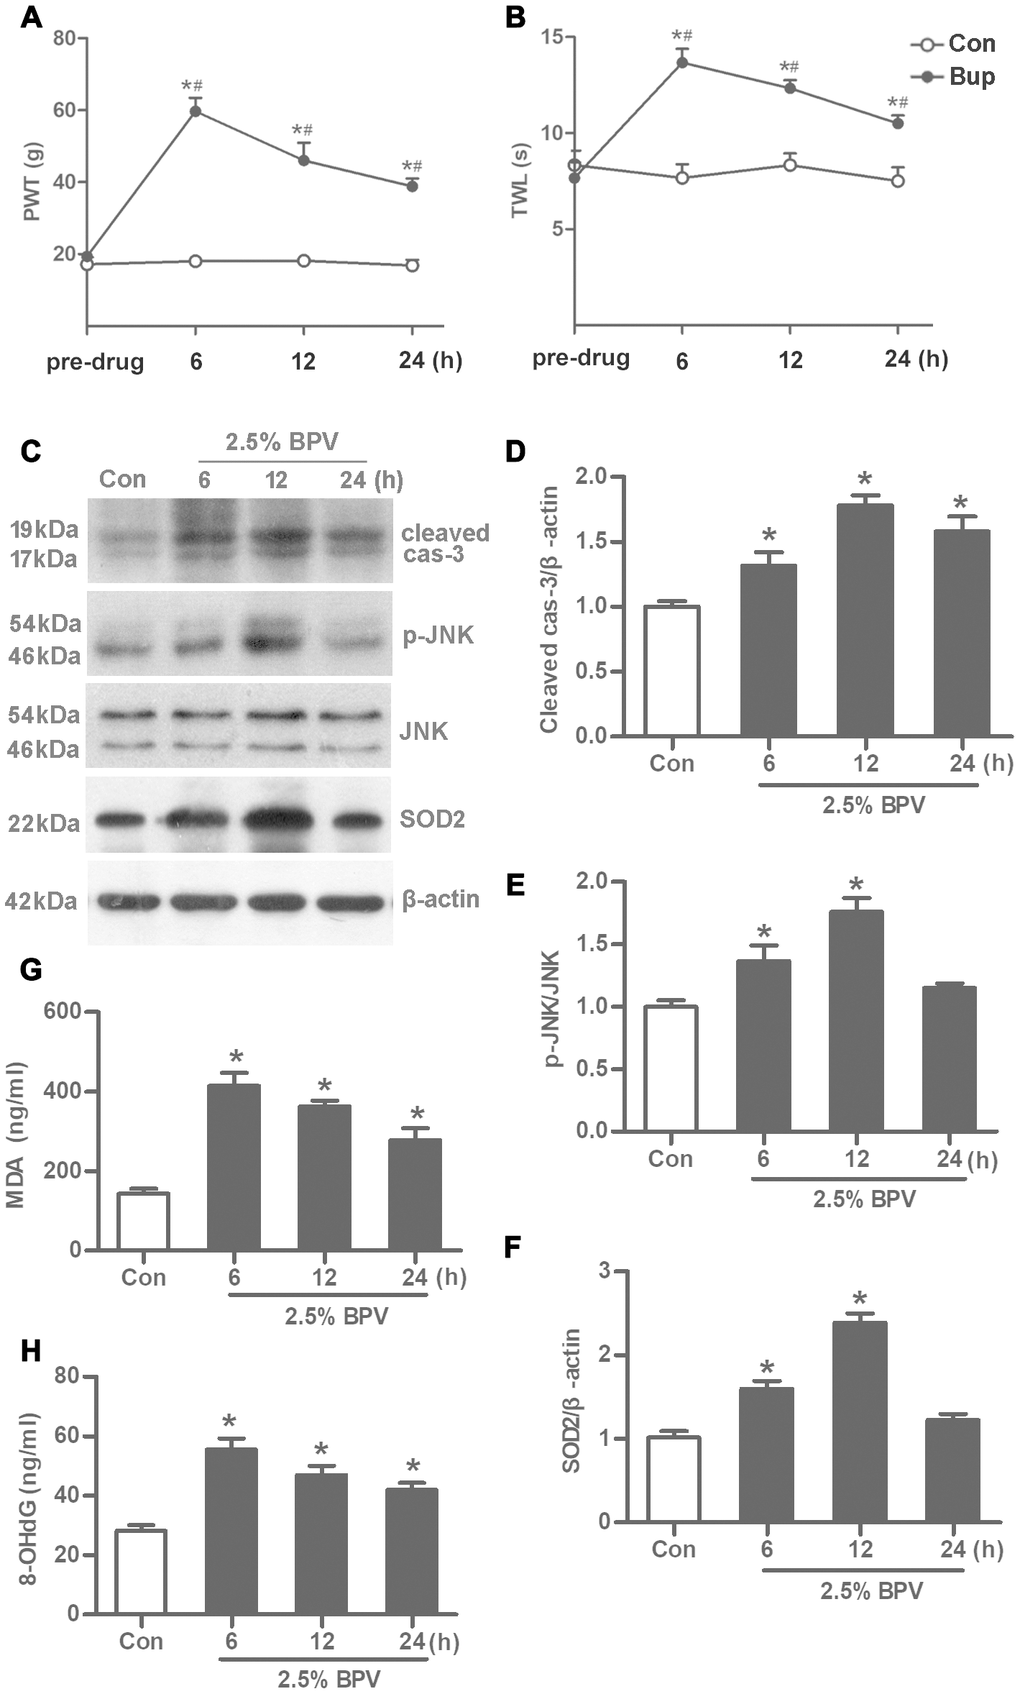 BPV caused spinal cord oxidative injury to activate JNK signaling and elevate SOD2 transcription in rats. Con: intrathecal injection of 0.9% saline with 0.2 μl/g in rats; BPV: intrathecal injection of 2.5% BPV with 0.2 μl/g in rats. (A, B) spinal reflex function in different times (6th h, 12th h or 24th h after intrathecal injection of 2.5% BPV or 0.9% saline with 0.2 μl/g) was investigated by PWT and TWL values; pre-drug: rats before intrathecal injection of 0.9% saline or 2.5% BPV; Values are the mean± SEM of n = 6; *: PPC–H) MDA and 8-OHdG production, JNK phosphorylation and SOD2 transcription were measured in spinal intumescentia lumbalis of rats in different times (6th h, 12th h or 24th h after intrathecal injection of BPV or saline); Values are the mean± SEM of n = 6; *: P